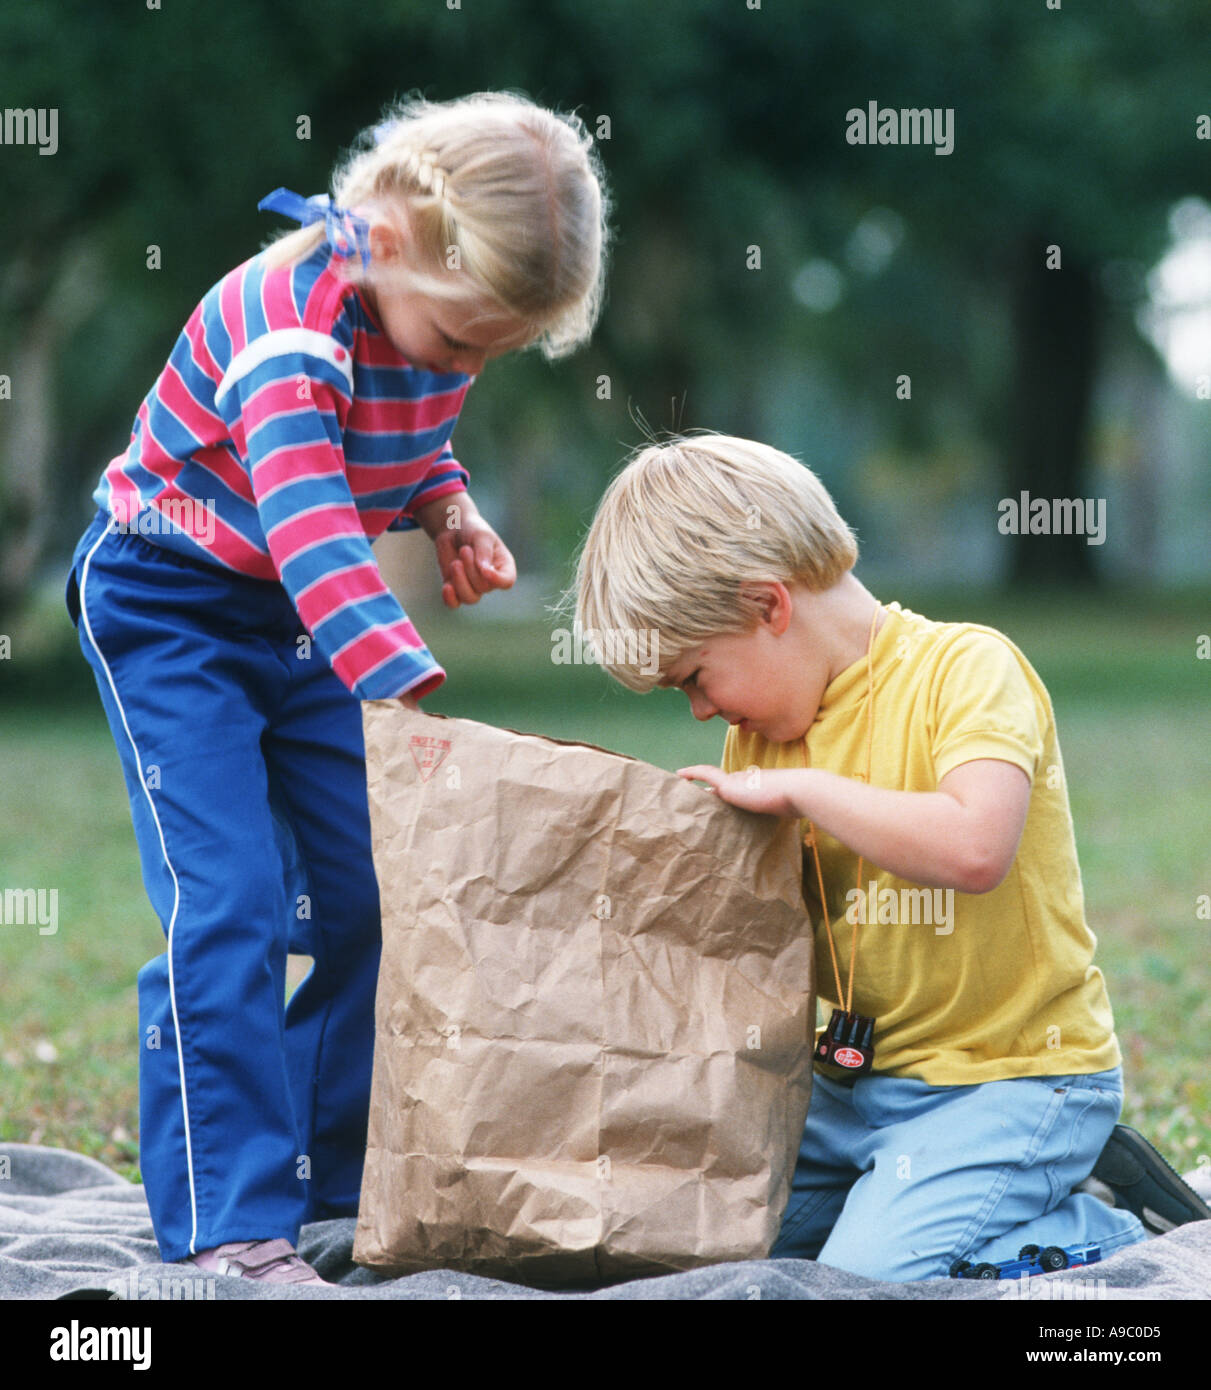 small boy and girl explore contents of a large paper bag Stock Photo